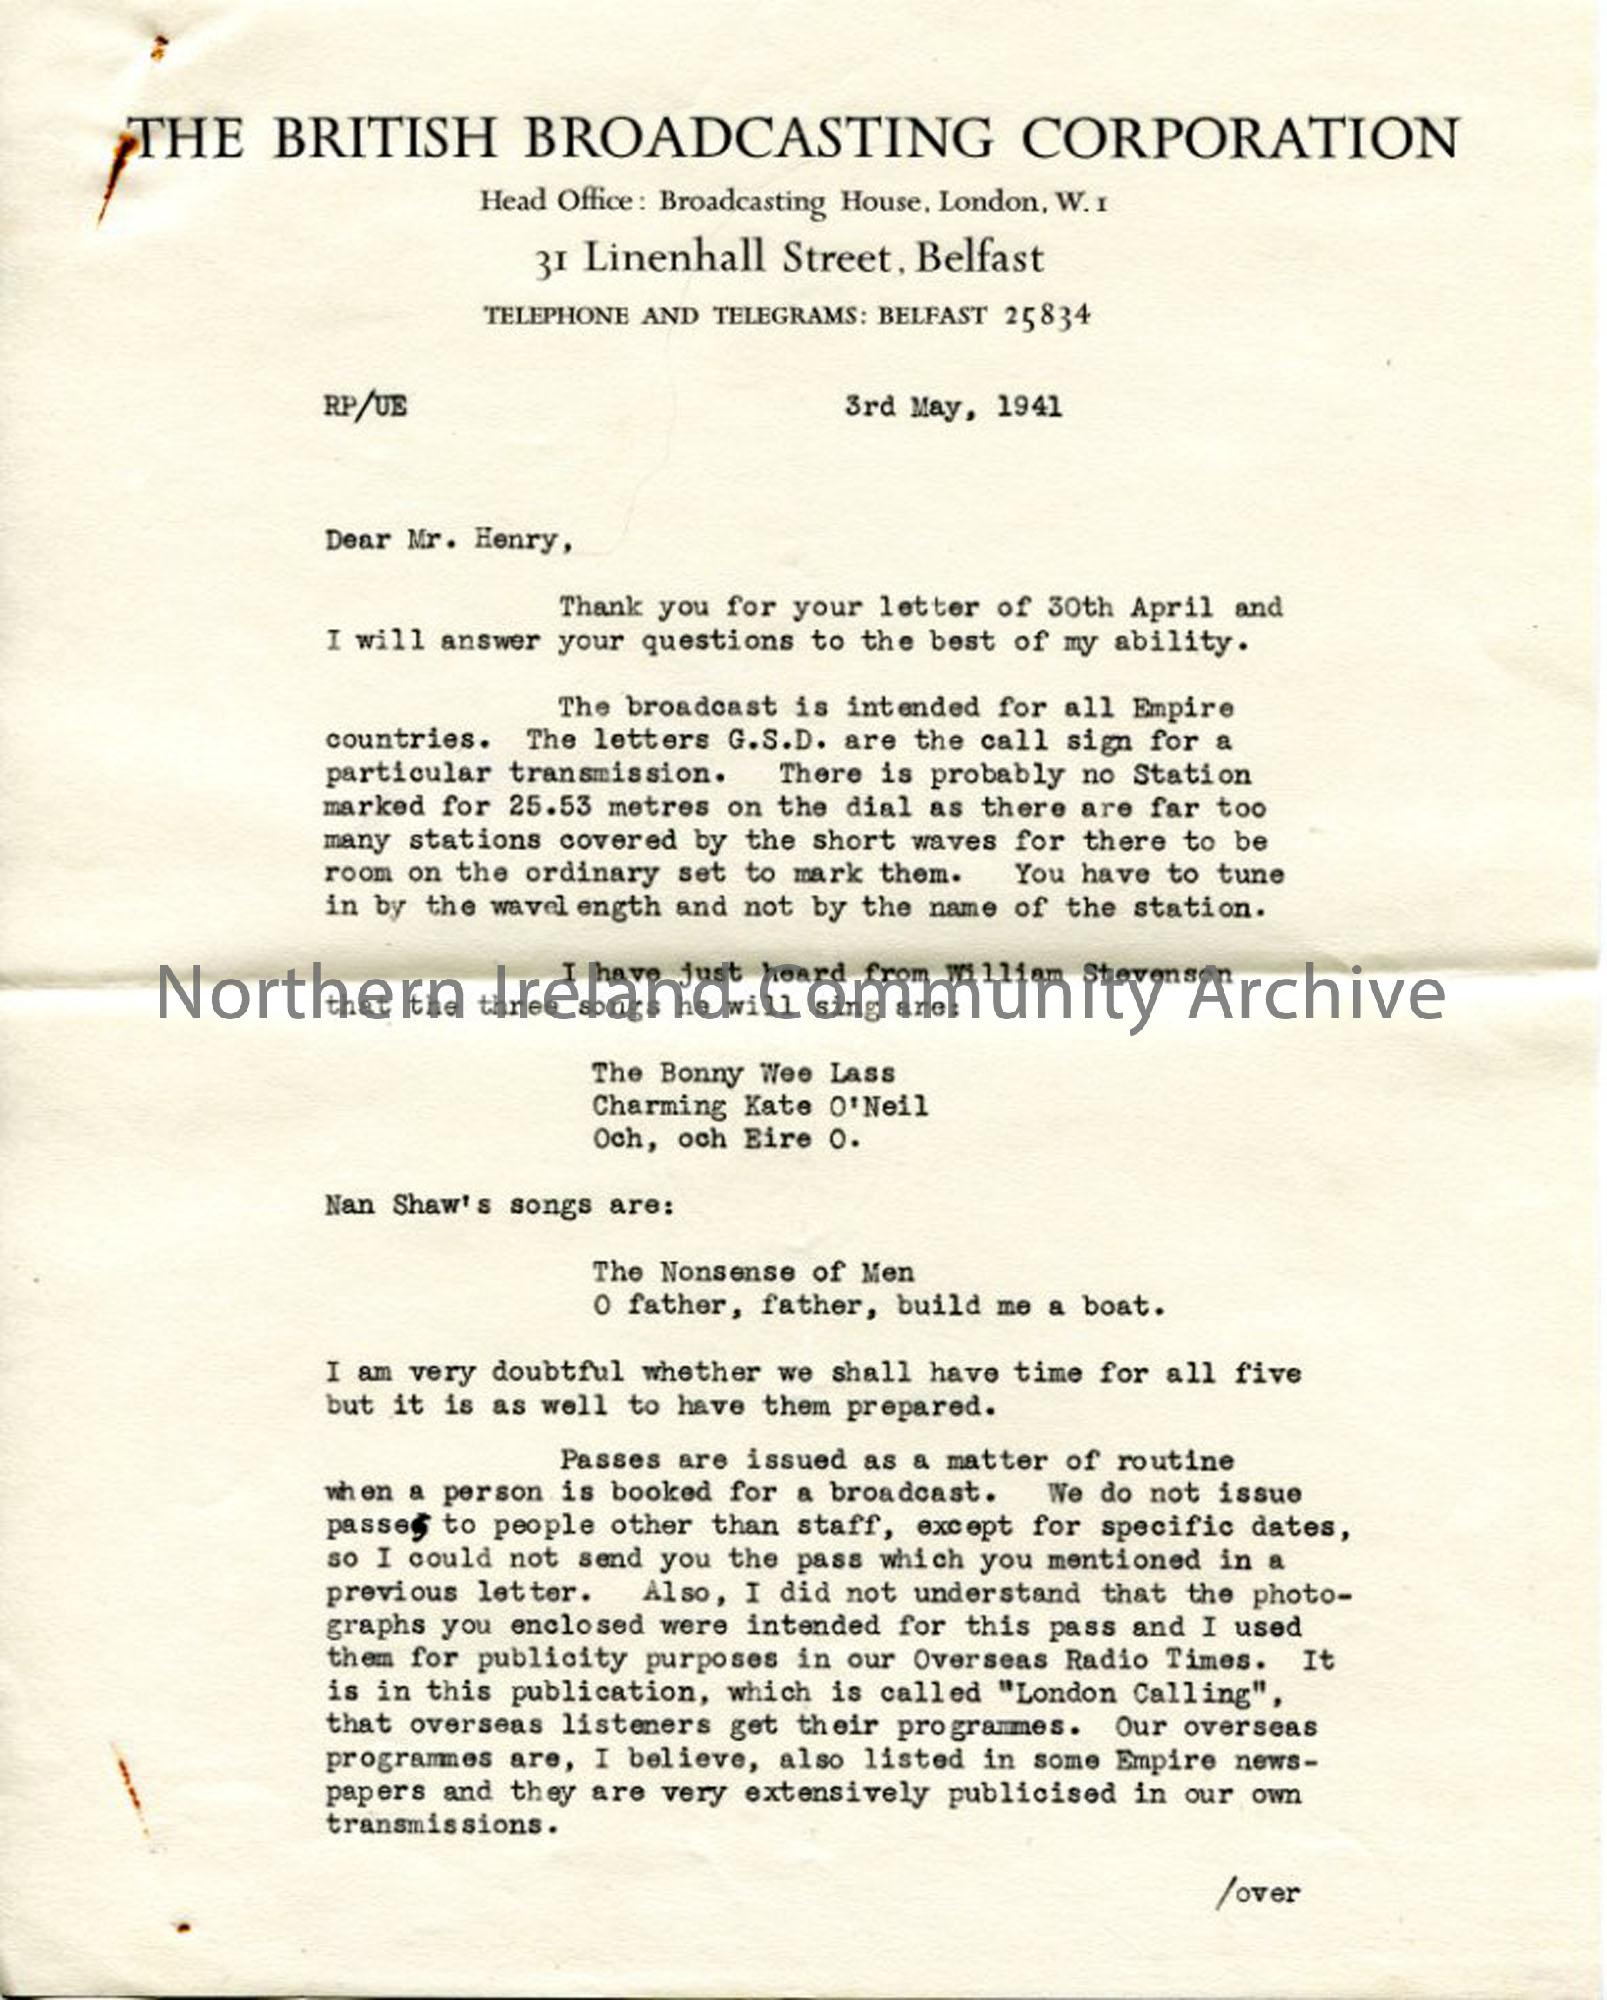 Page 1 of 2 – Letter from Ursula Eason of the BBC, dated 3.5.1941